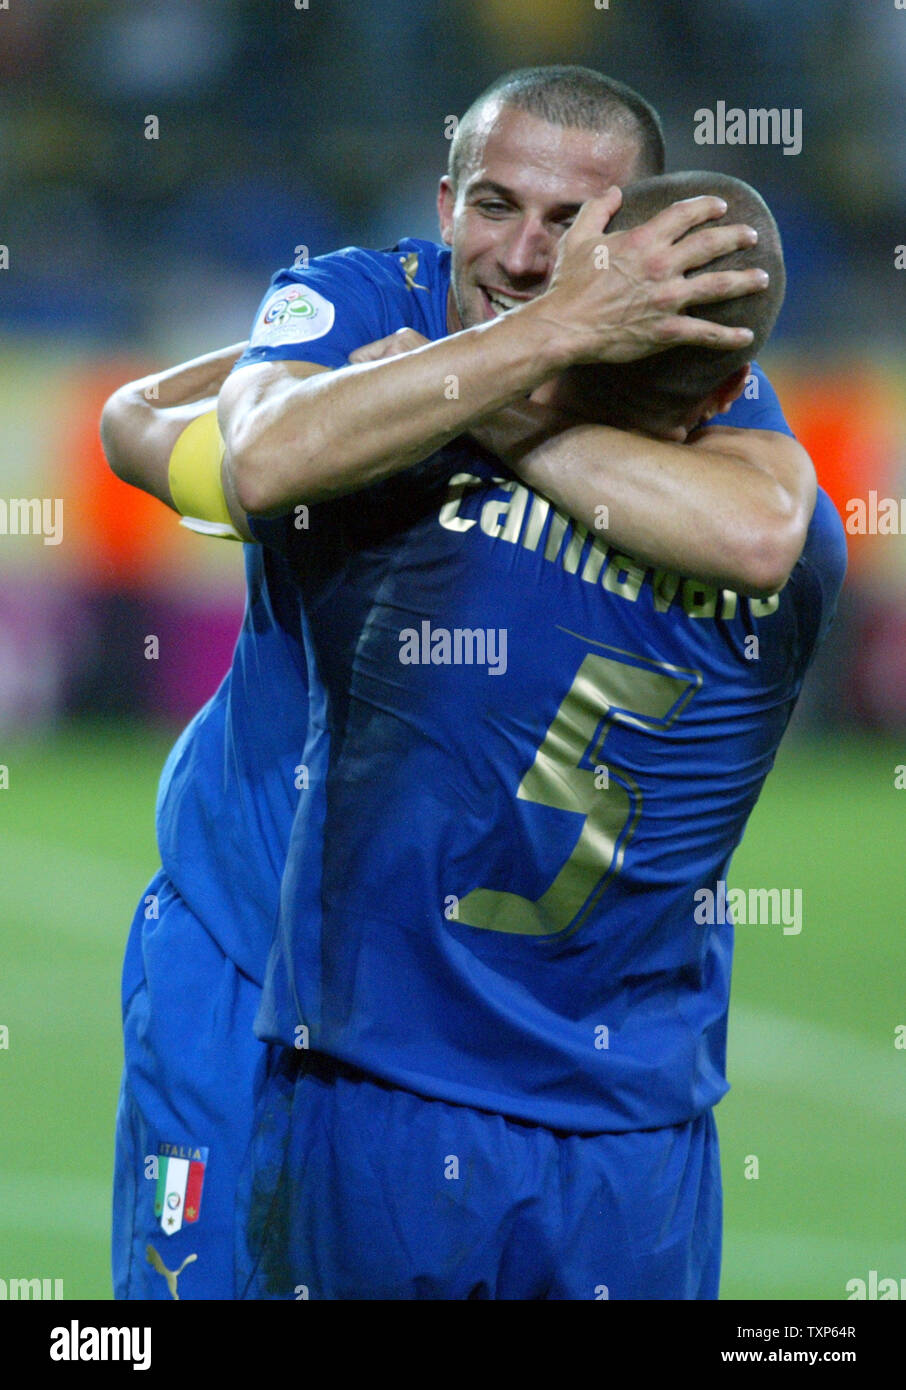 Fabio Cannavaro (5) and Alessandro Del Piero(7) celebrate  victory for the Italian team during World Cup soccer in Dortmund, Germany on July 4, 2006.  Italy defeated Germany 2-0.   (UPI Photo/Arthur Thill) Stock Photo